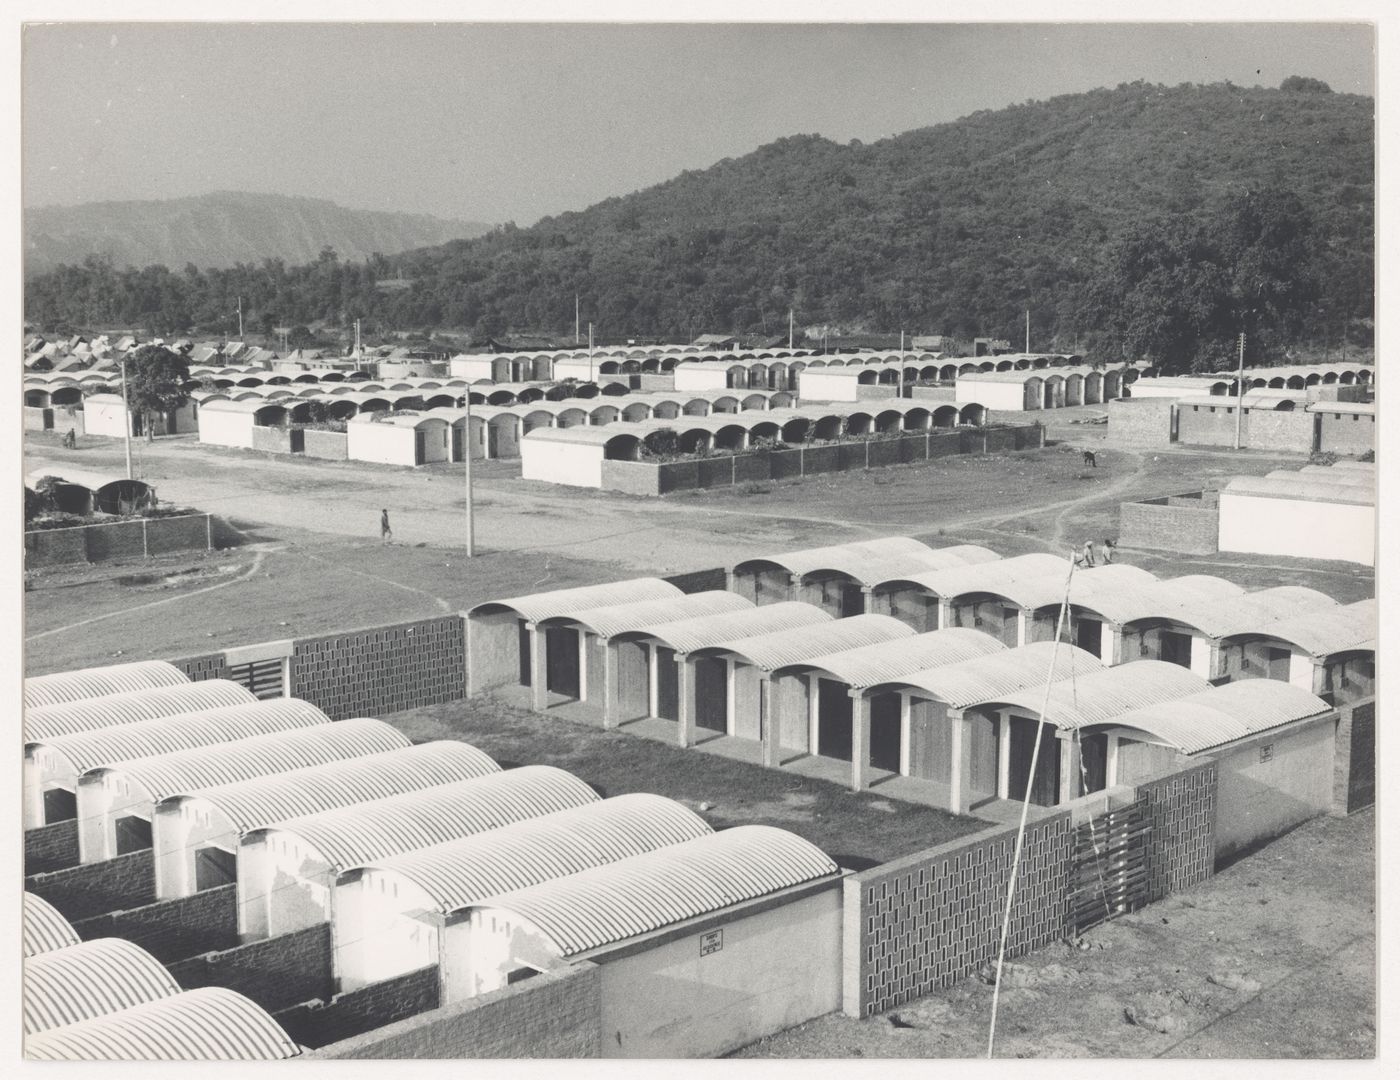 View of housing for workers, Talwara, India